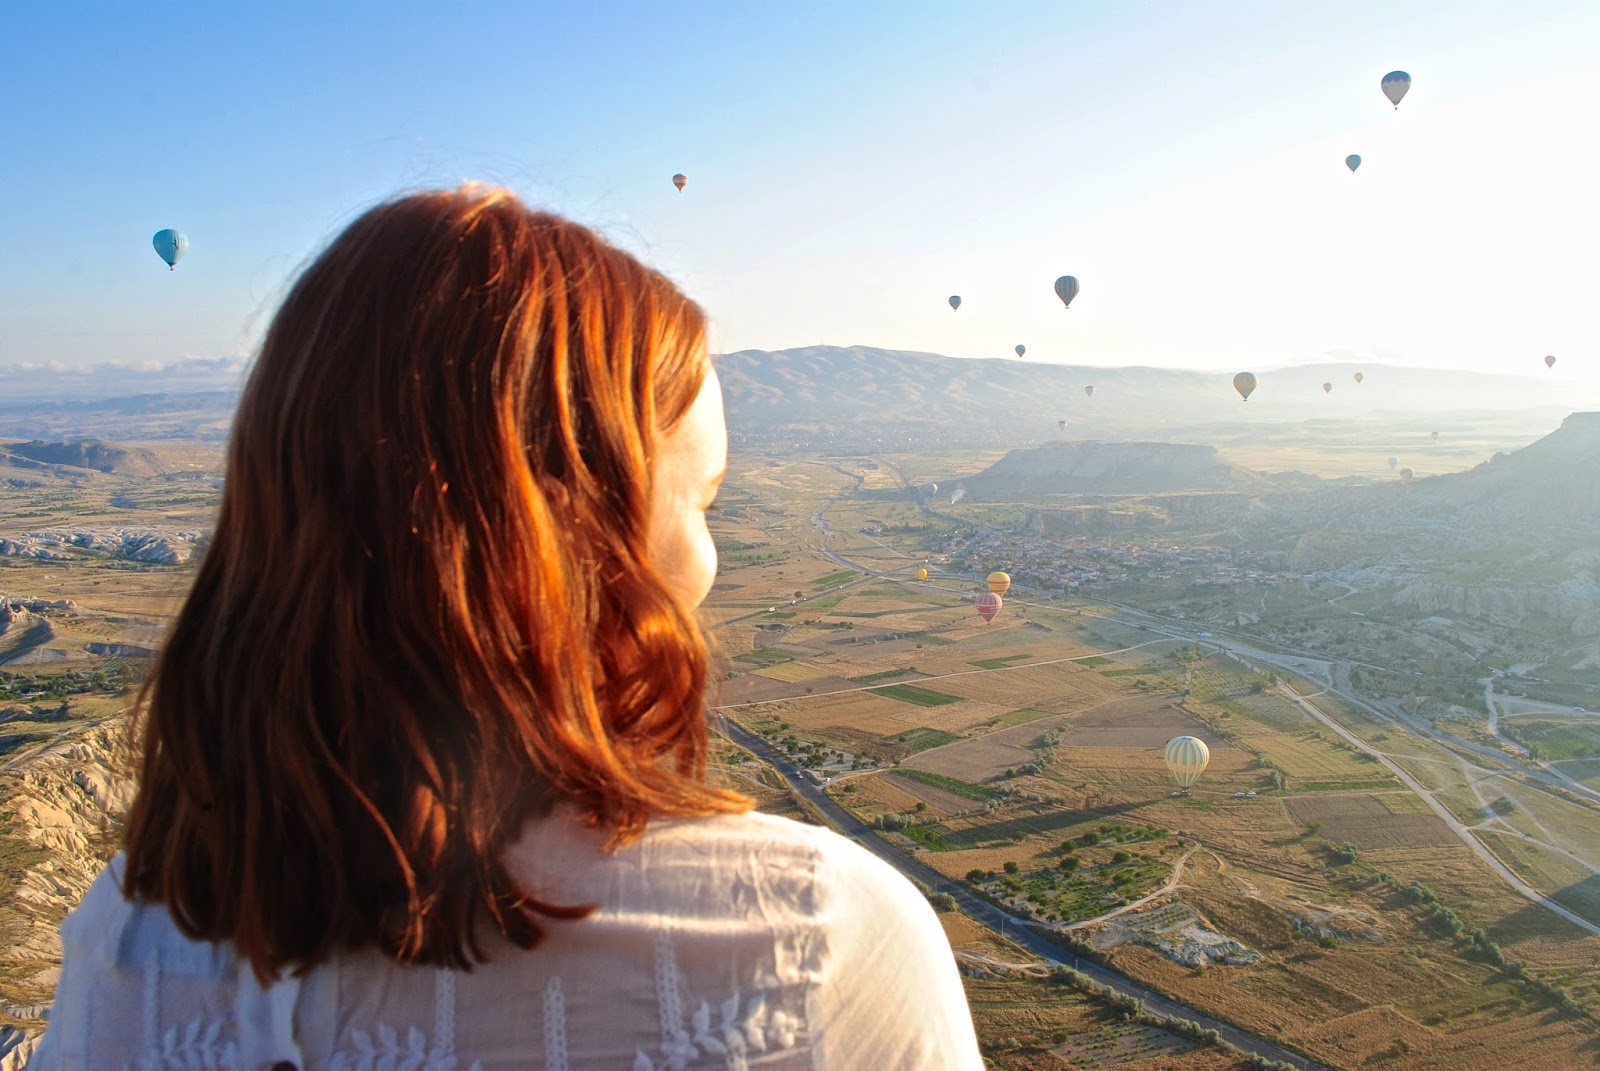 Hot Air Ballooning over Cappadocia at Sunrise with Butterfly Balloons